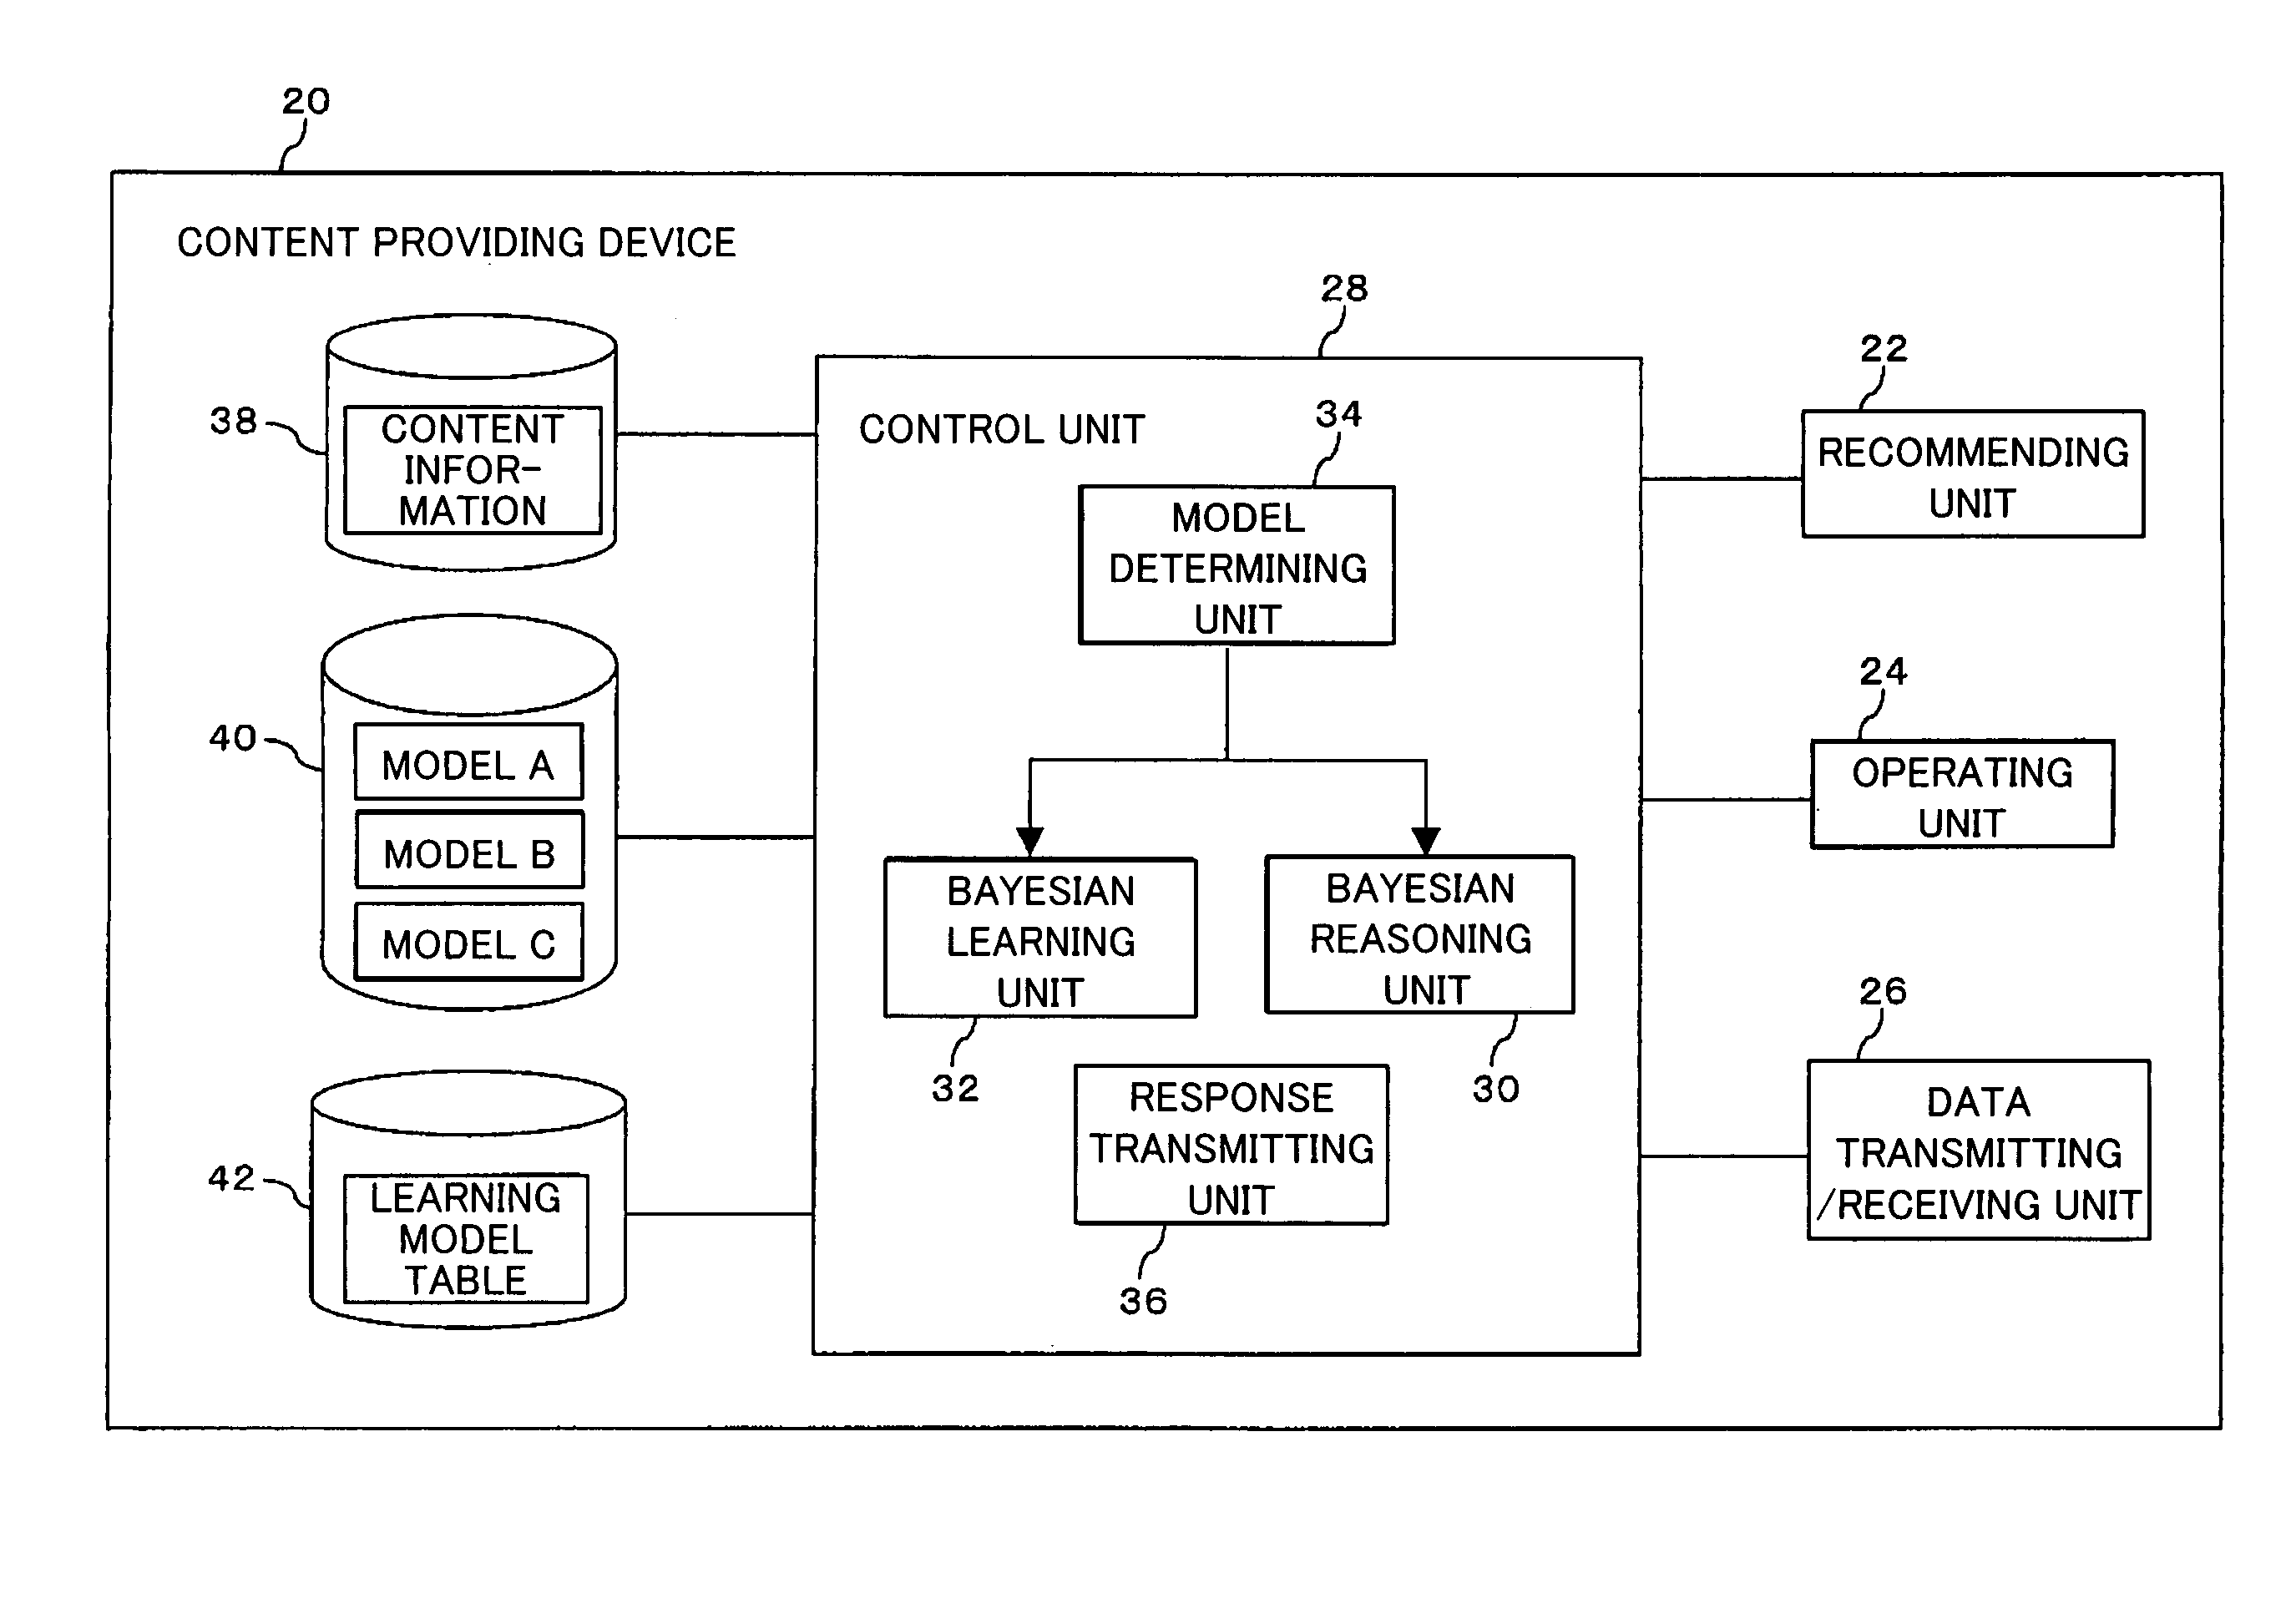 Vehicle information processing system for content recommendation using Bayesian network models